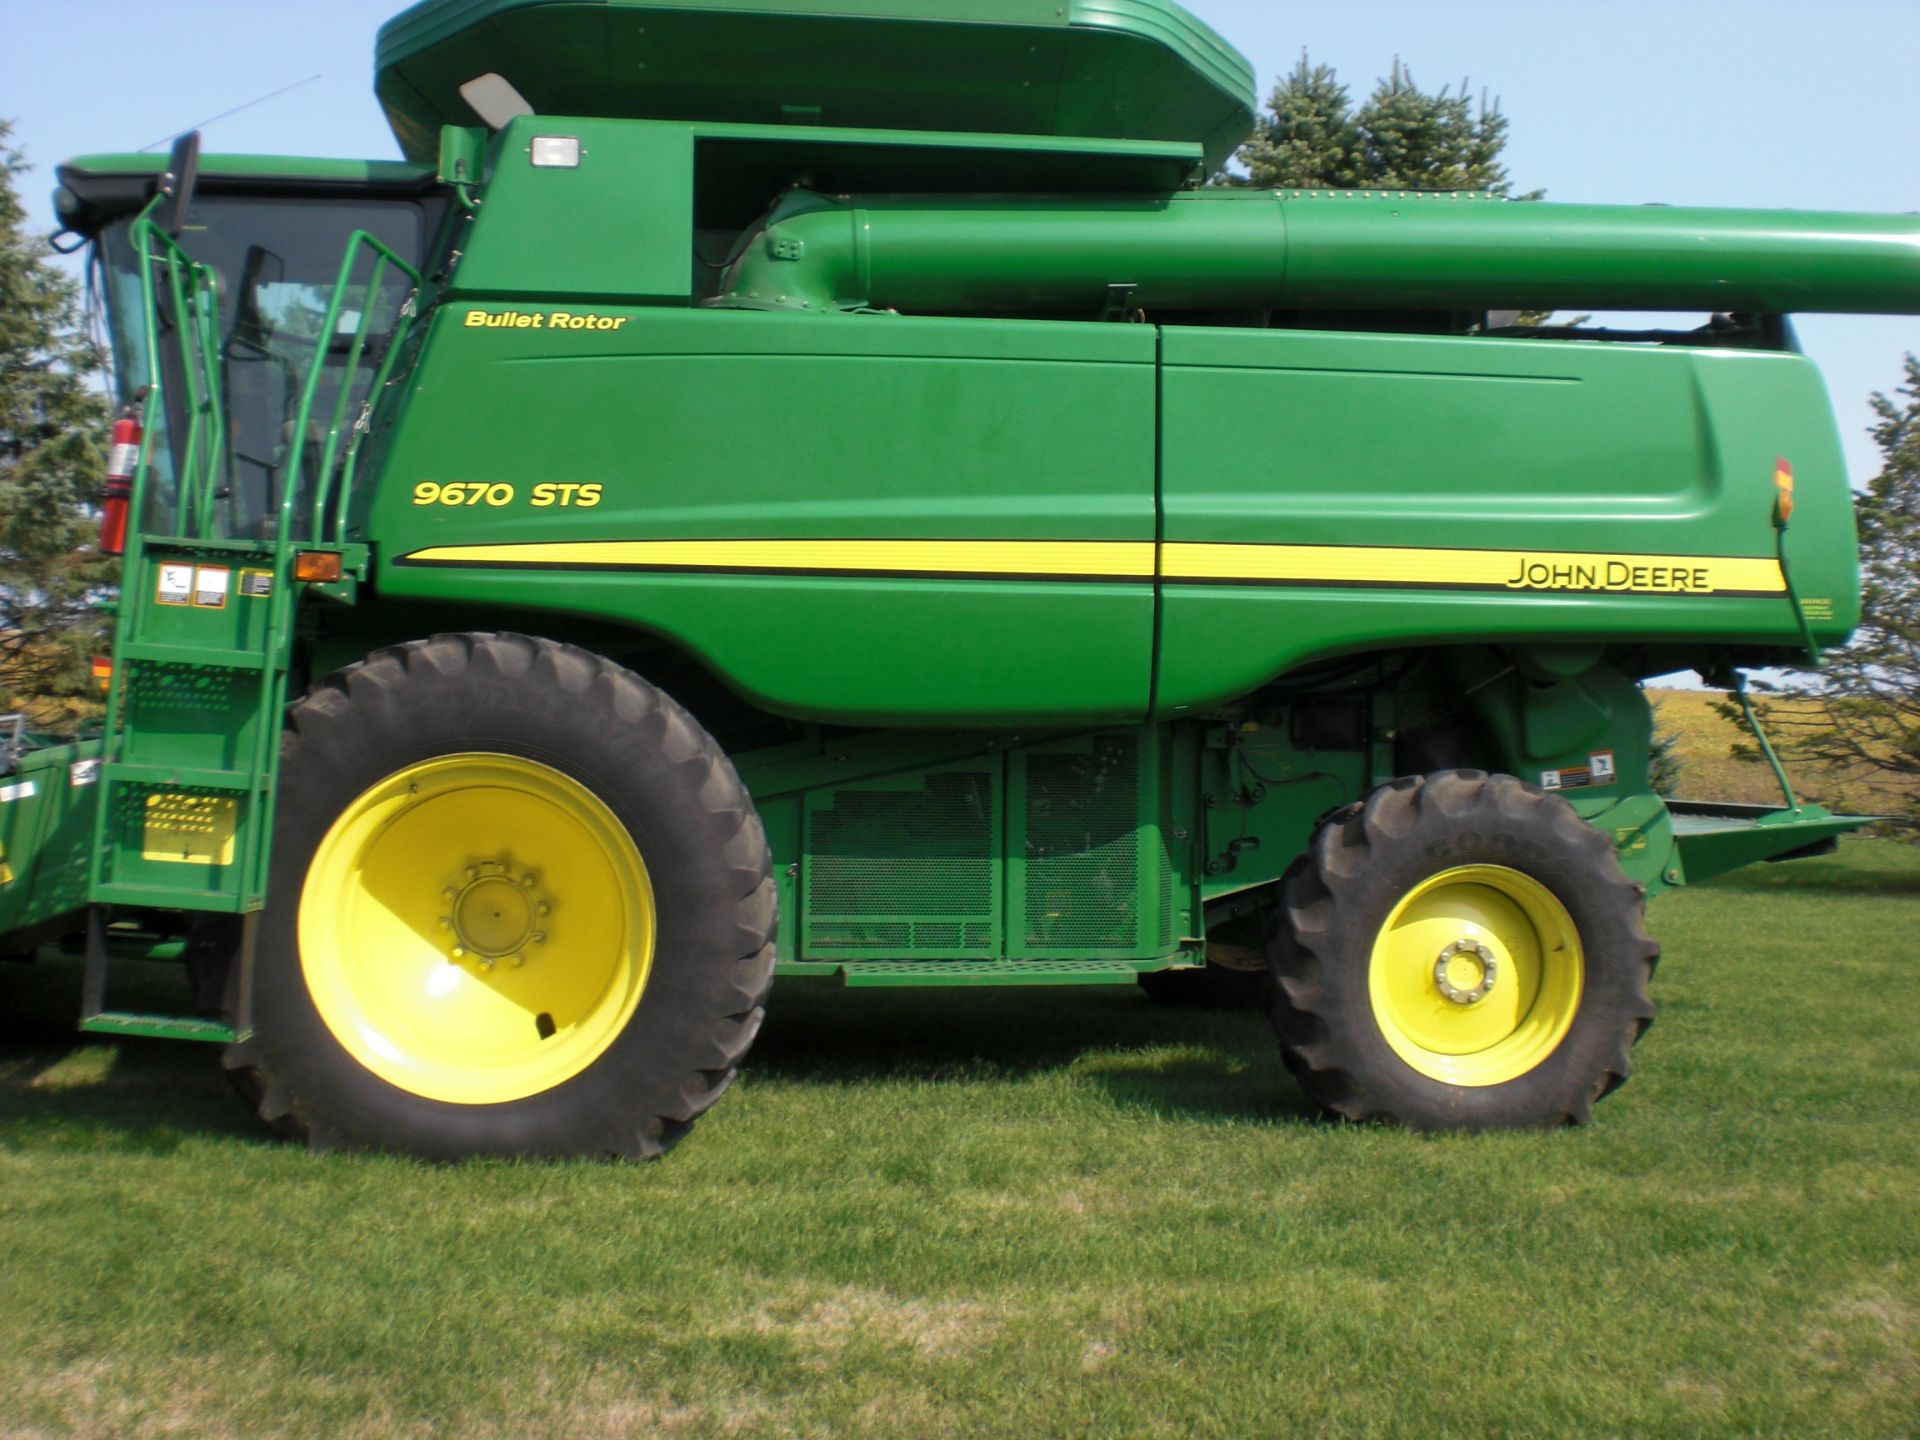 2009 JD 9670 STS bullet rotor - Image 7 of 8